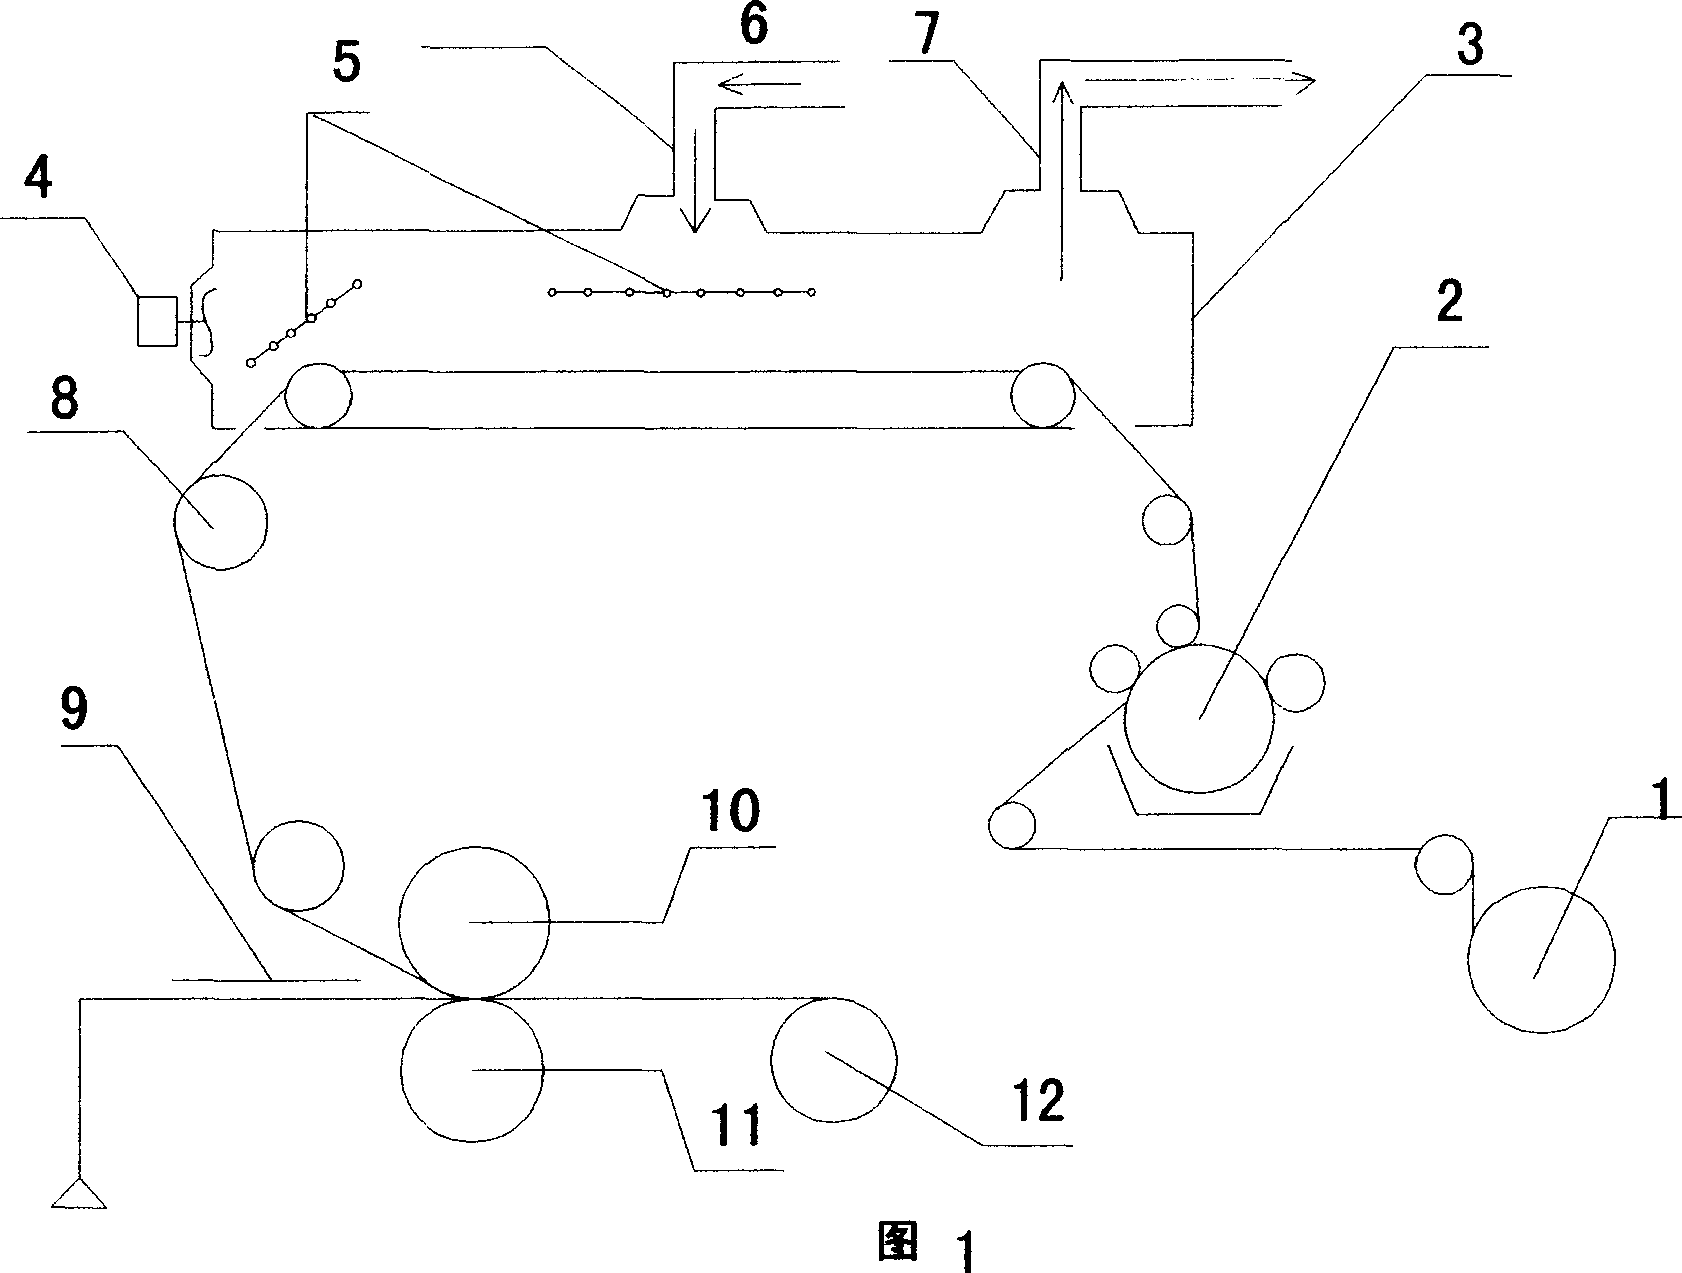 Hot pressing device for jointing overlay film dryed by drying tunnel, and method for gluing overlay film by painting water